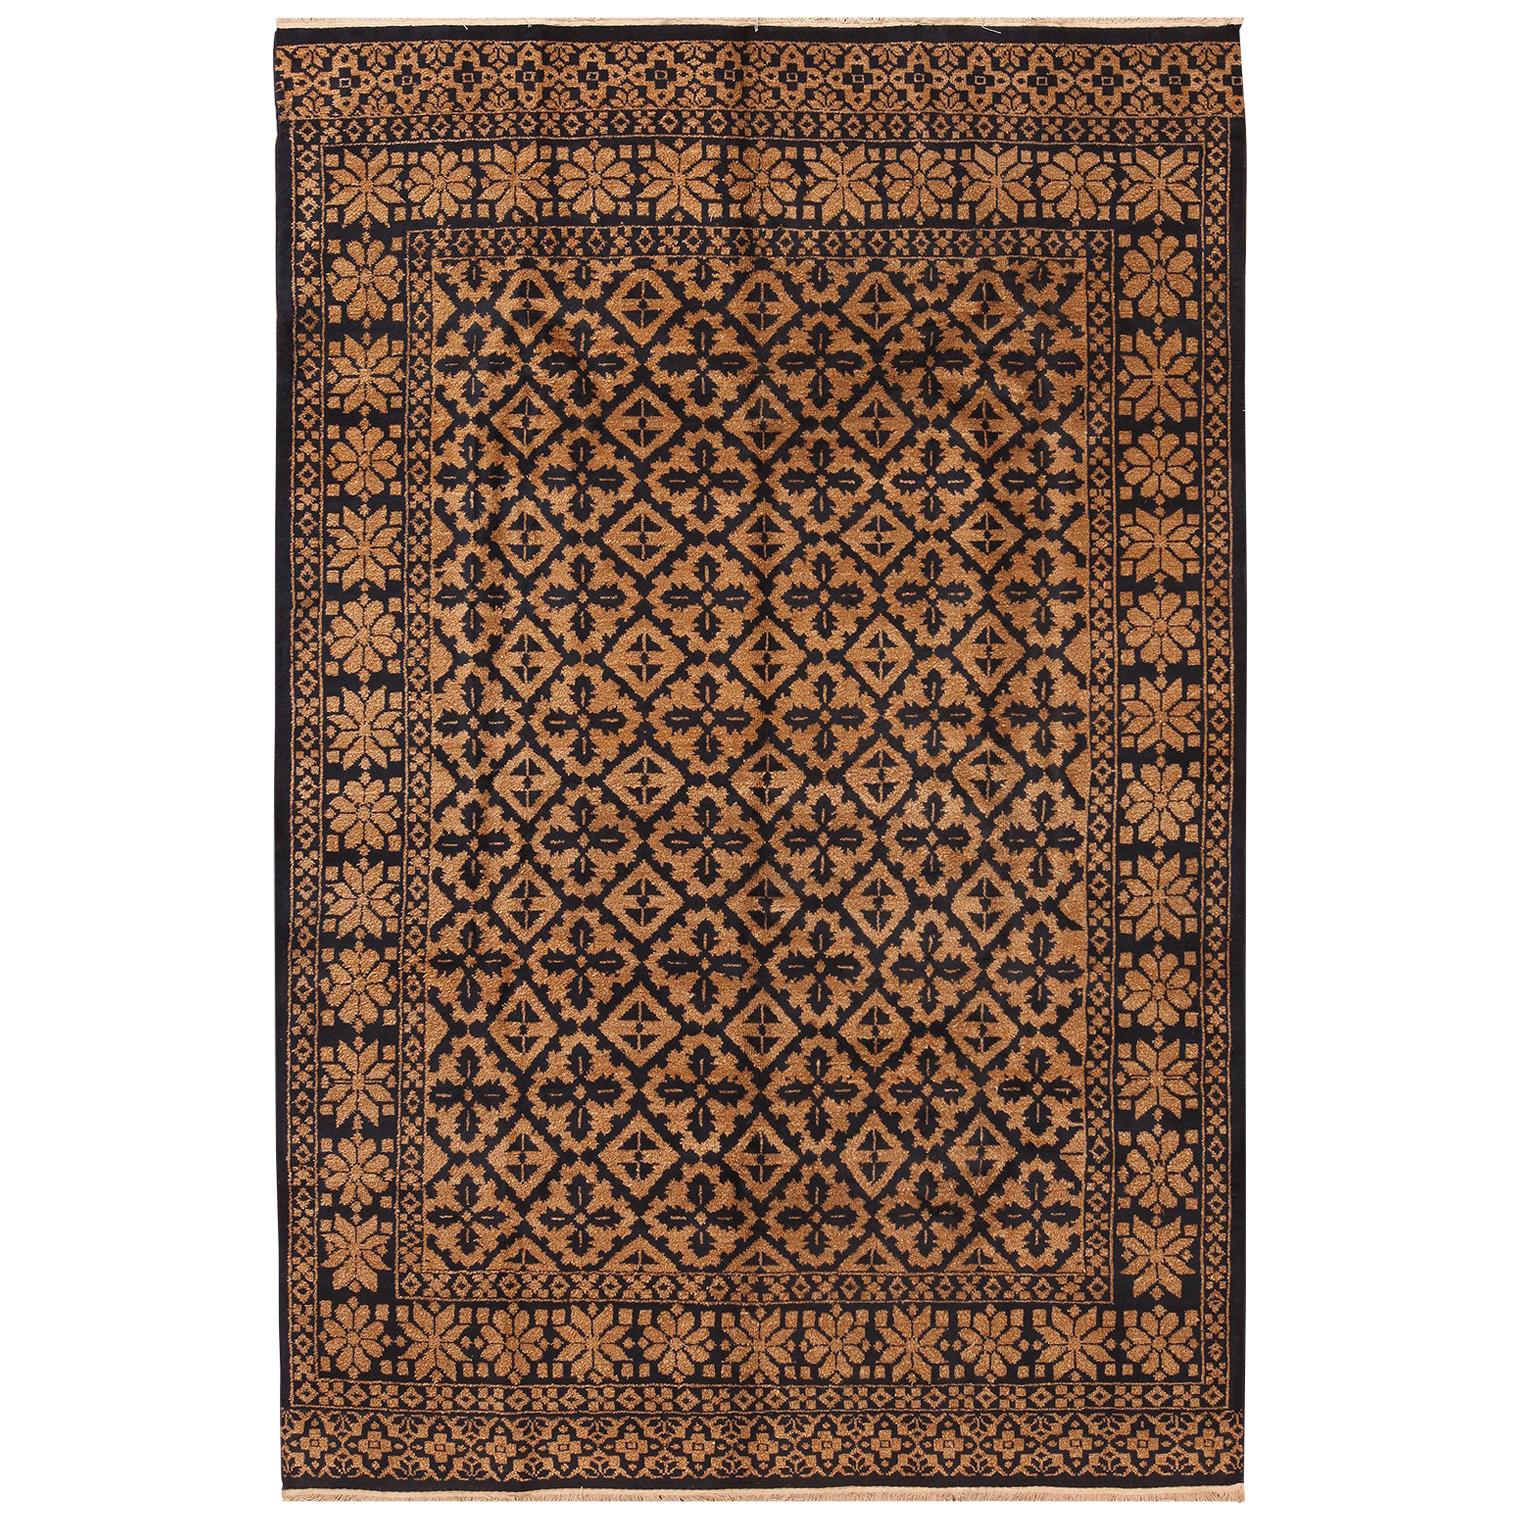 Amazing Geometric Modern Indian Rug. 6 ft x 9 ft For Sale